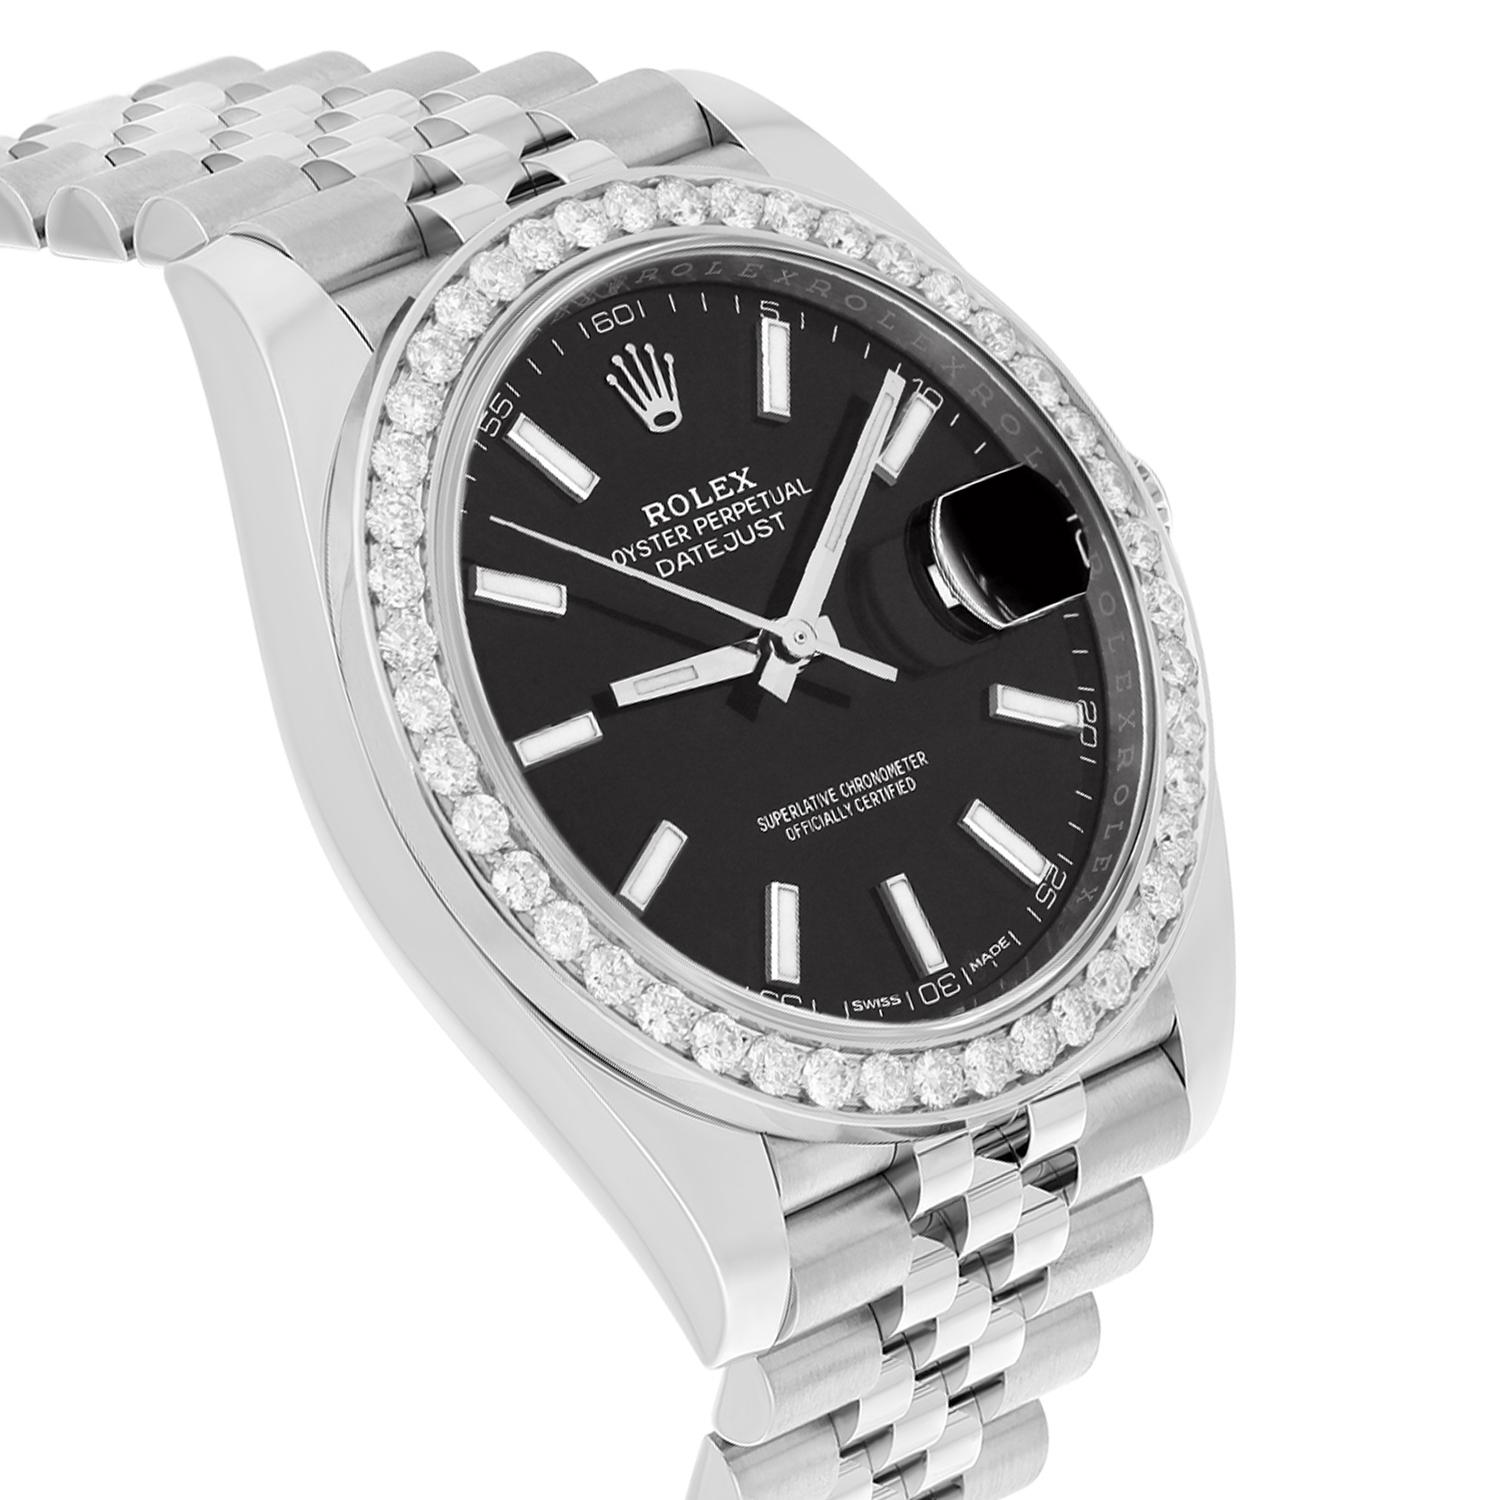 Round Cut Rolex Datejust 41 Steel Watch Black Index Dial Diamonds Mens Jubilee Band 126300 For Sale